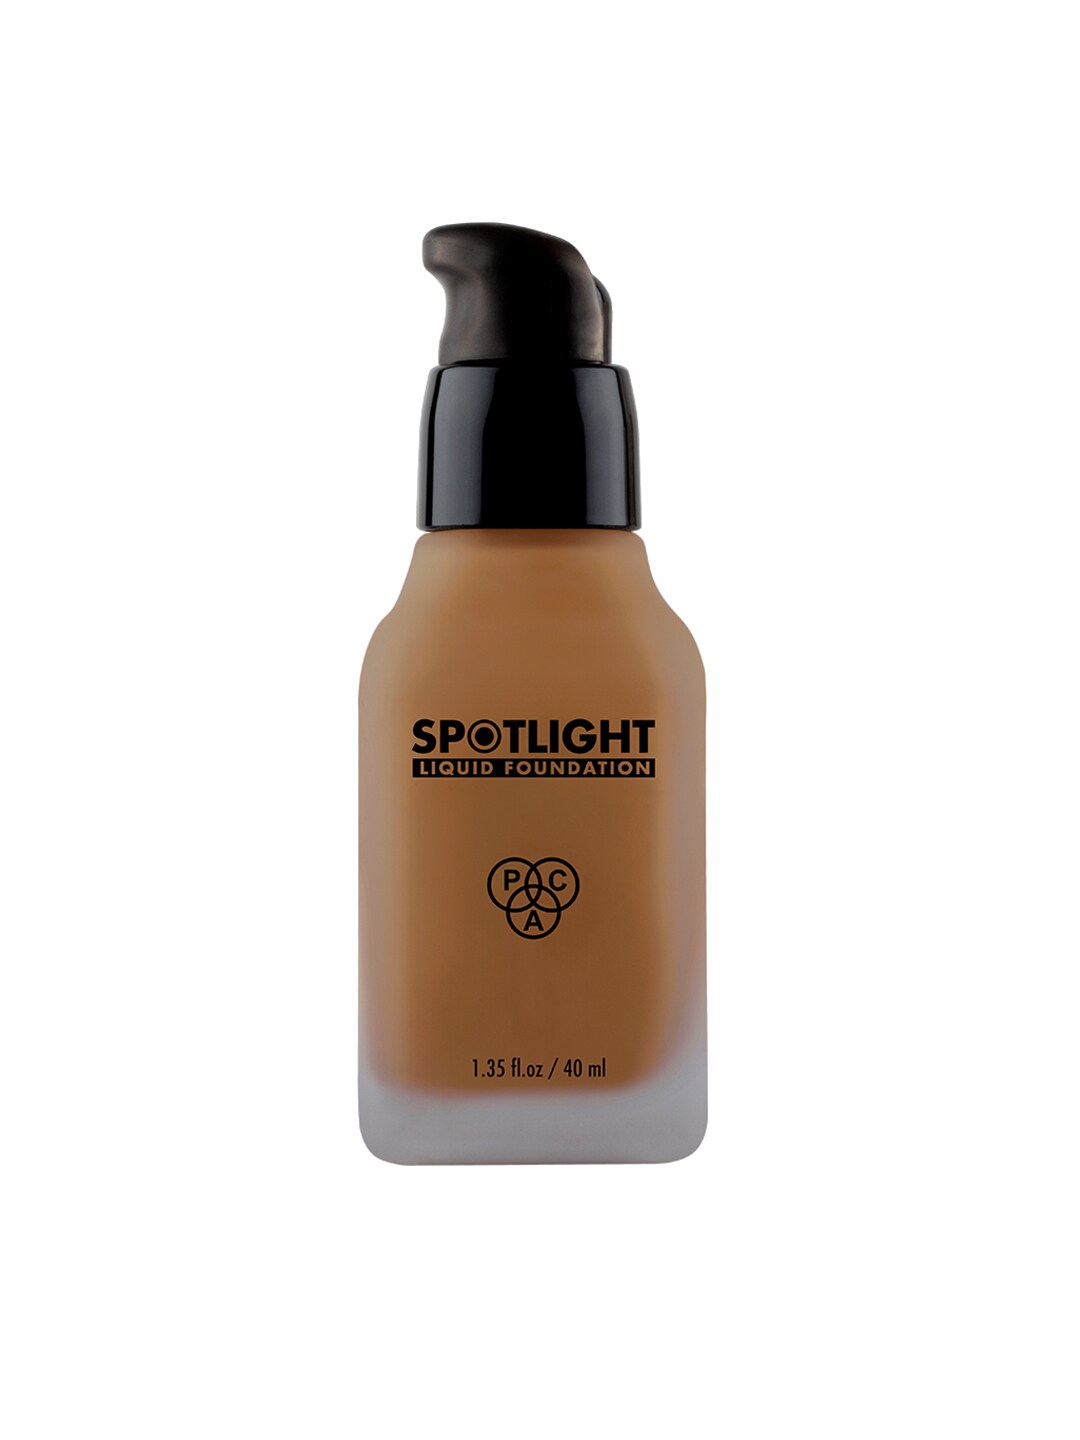 PAC Spotlight Waterproof Liquid Foundation with Hyaluronic Acid 40ml - Warm Toffee 18 Price in India